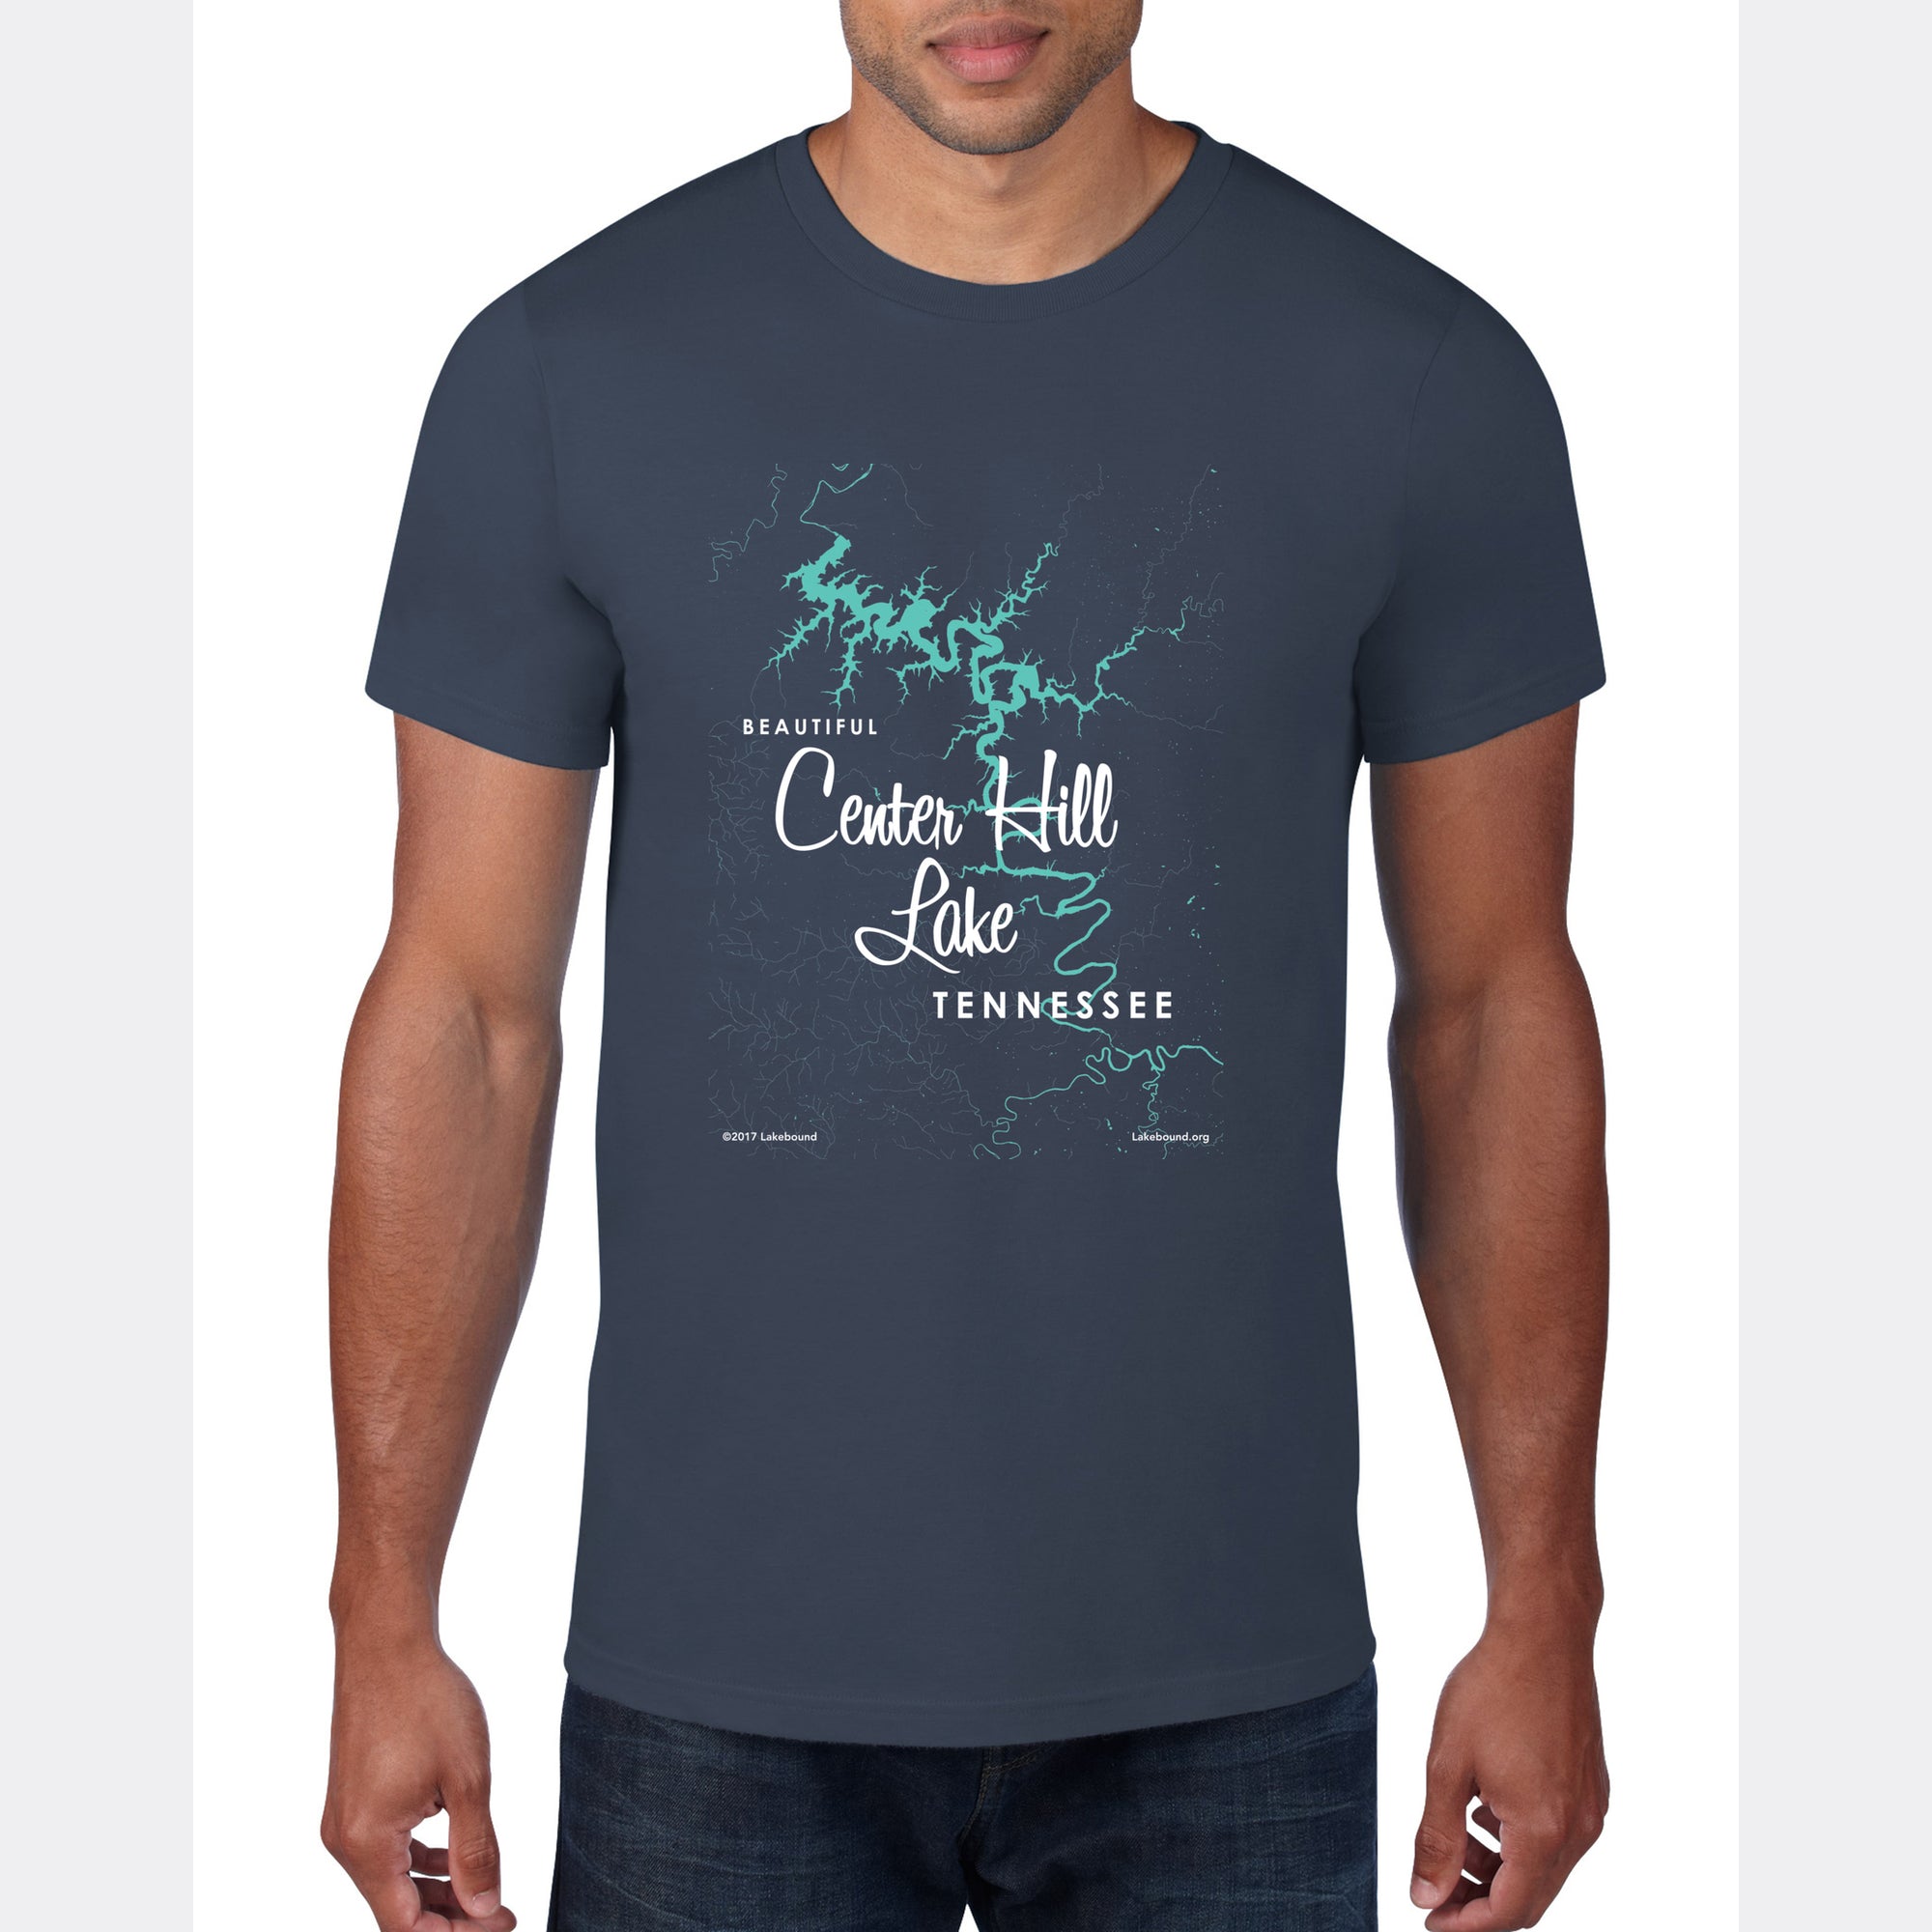 Center Hill Lake Tennessee, T-Shirt